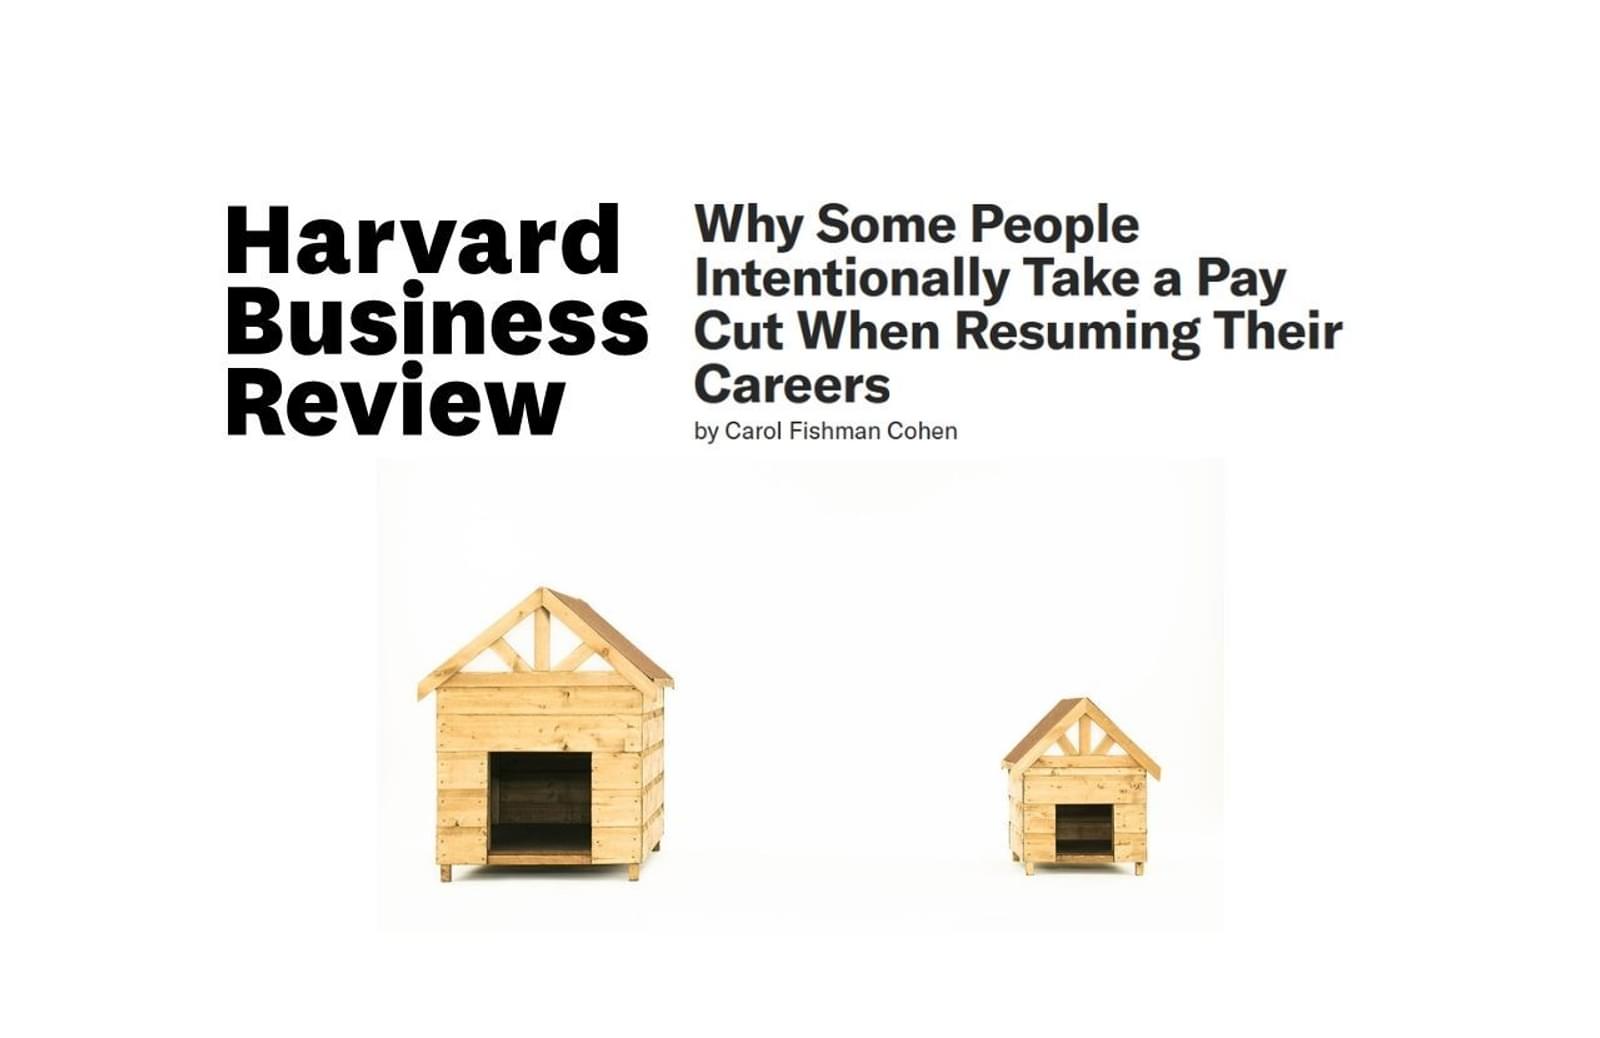 Hbr why some people intentionally take lower level position news thumbnail